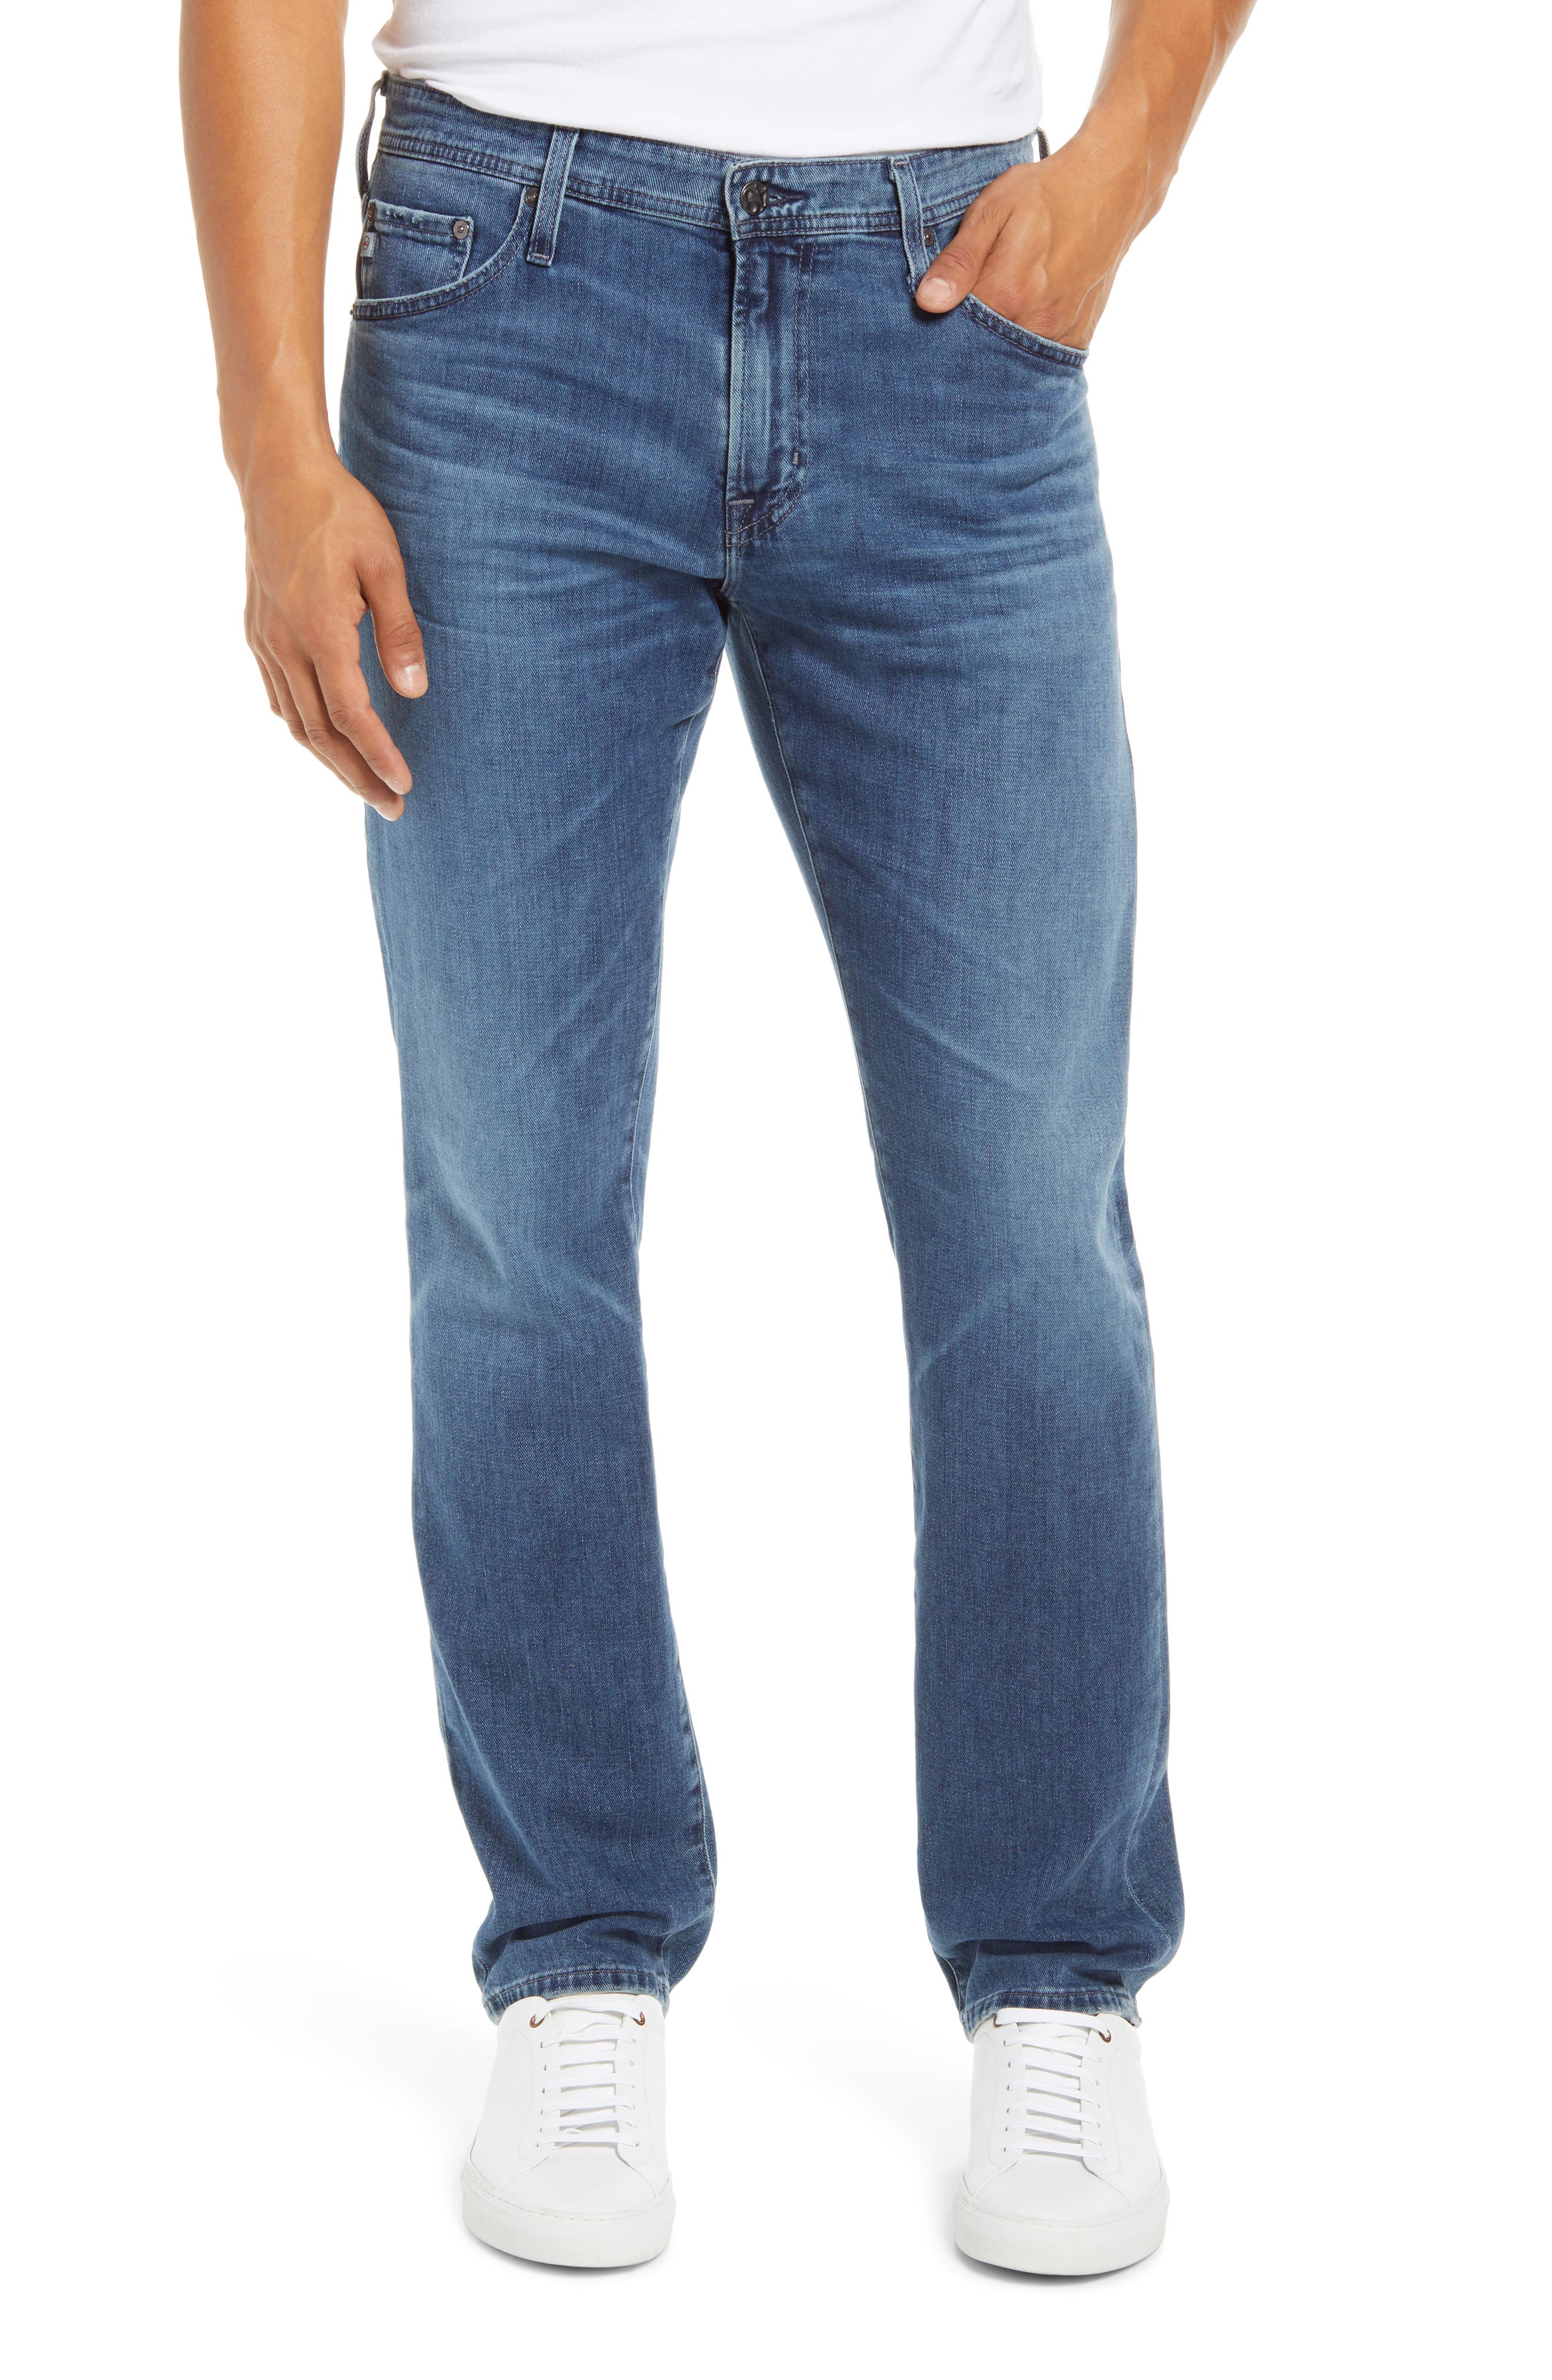 adriano goldschmied jeans mens